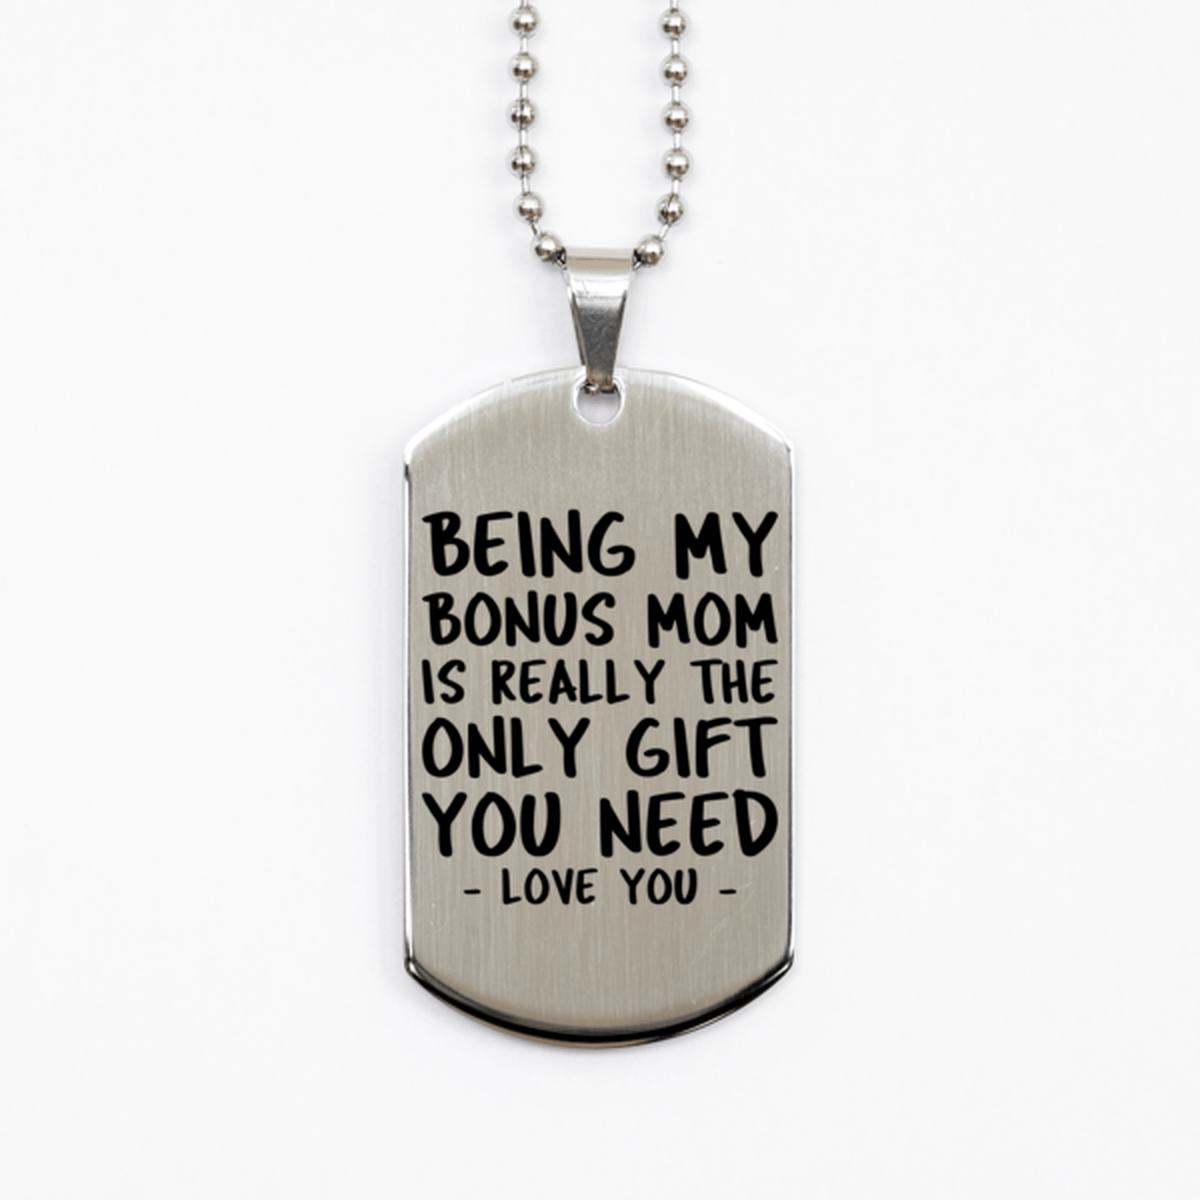 Funny Bonus Mom Silver Dog Tag Necklace, Being My Bonus Mom Is Really the Only Gift You Need, Best Birthday Gifts for Bonus Mom